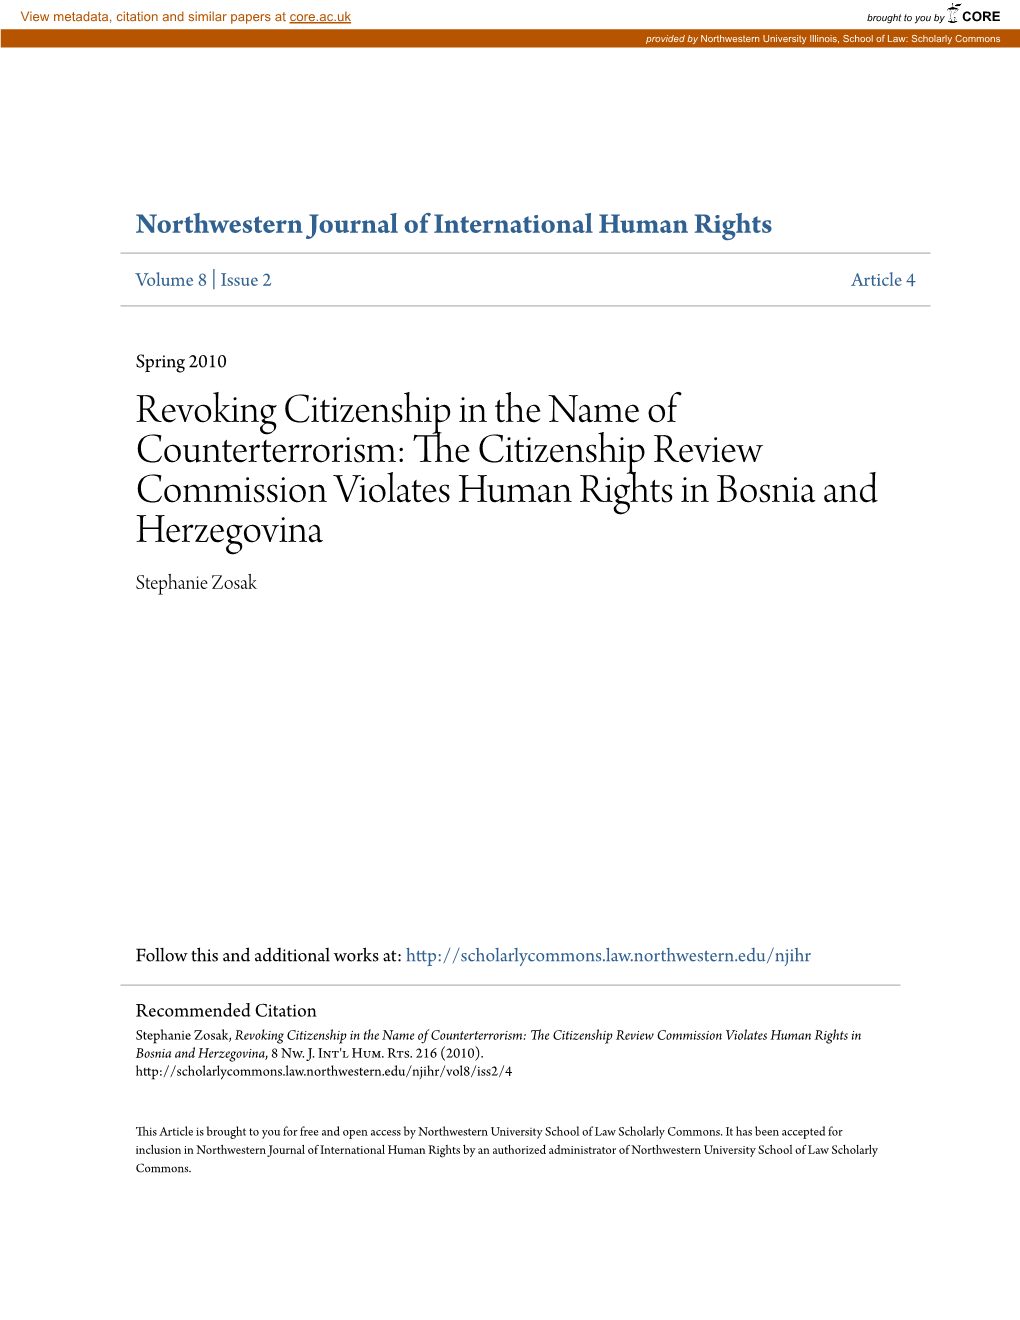 The Citizenship Review Commission Violates Human Rights in Bosnia and Herzegovina, 8 Nw